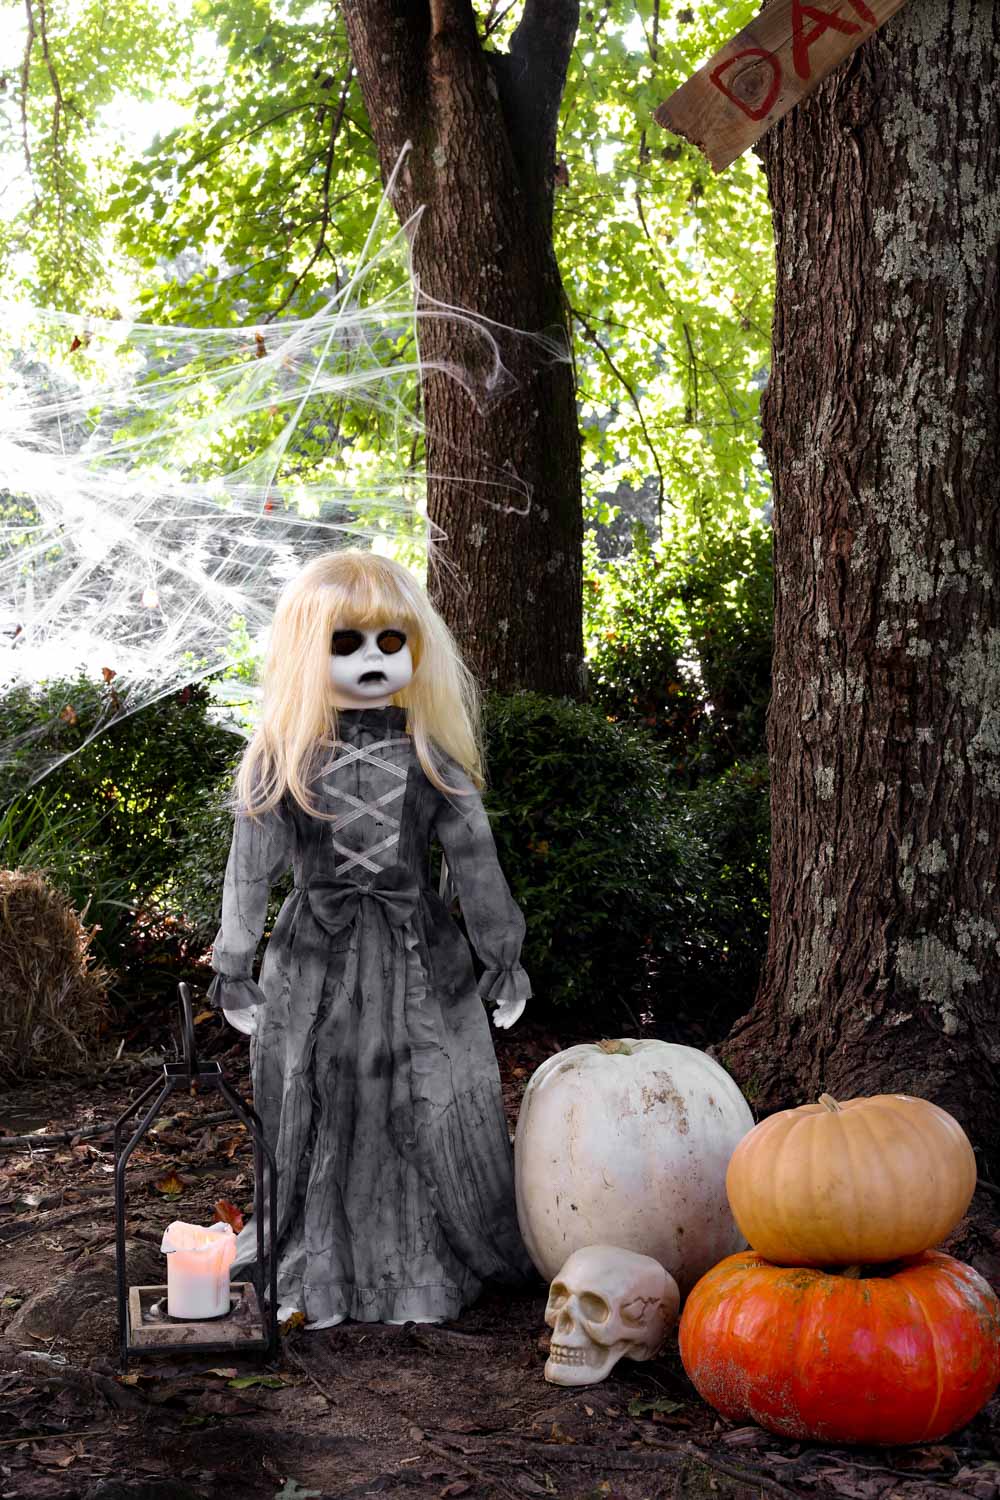 A ghostly doll with a white face and red eyes standing next to a skull and pumpkins.